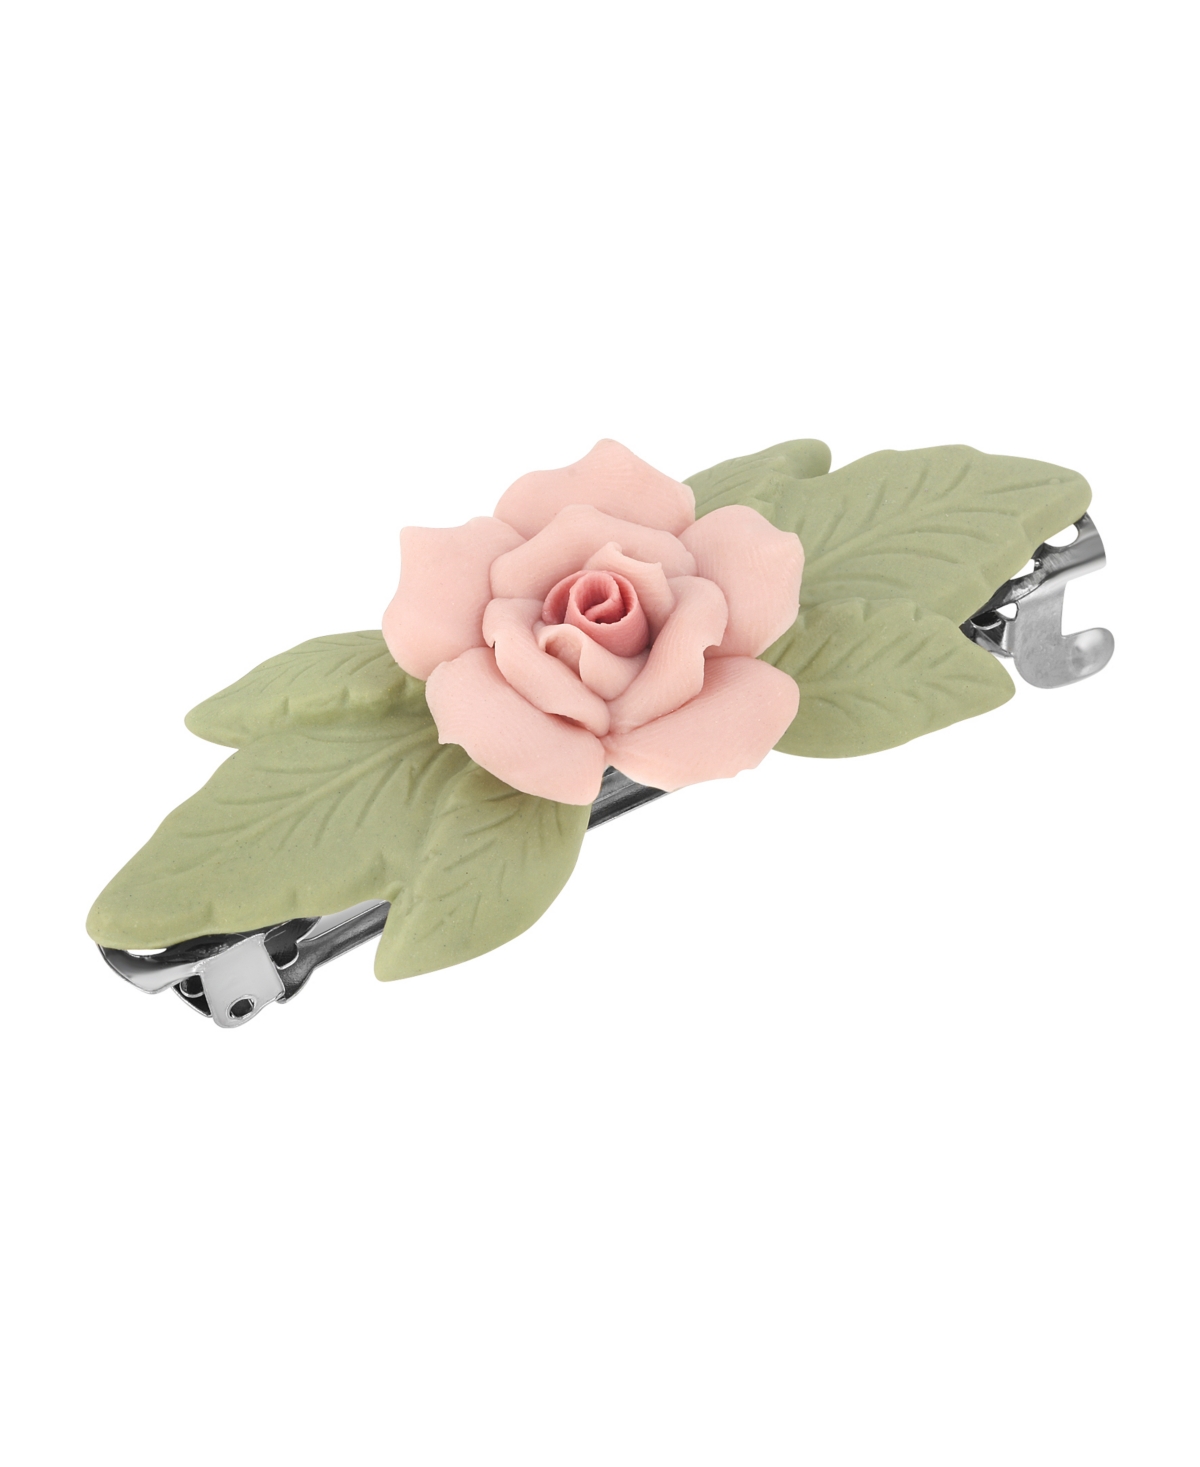 2028 Women's Silver-tone Genuine Porcelain French Hair Barrette In Pink